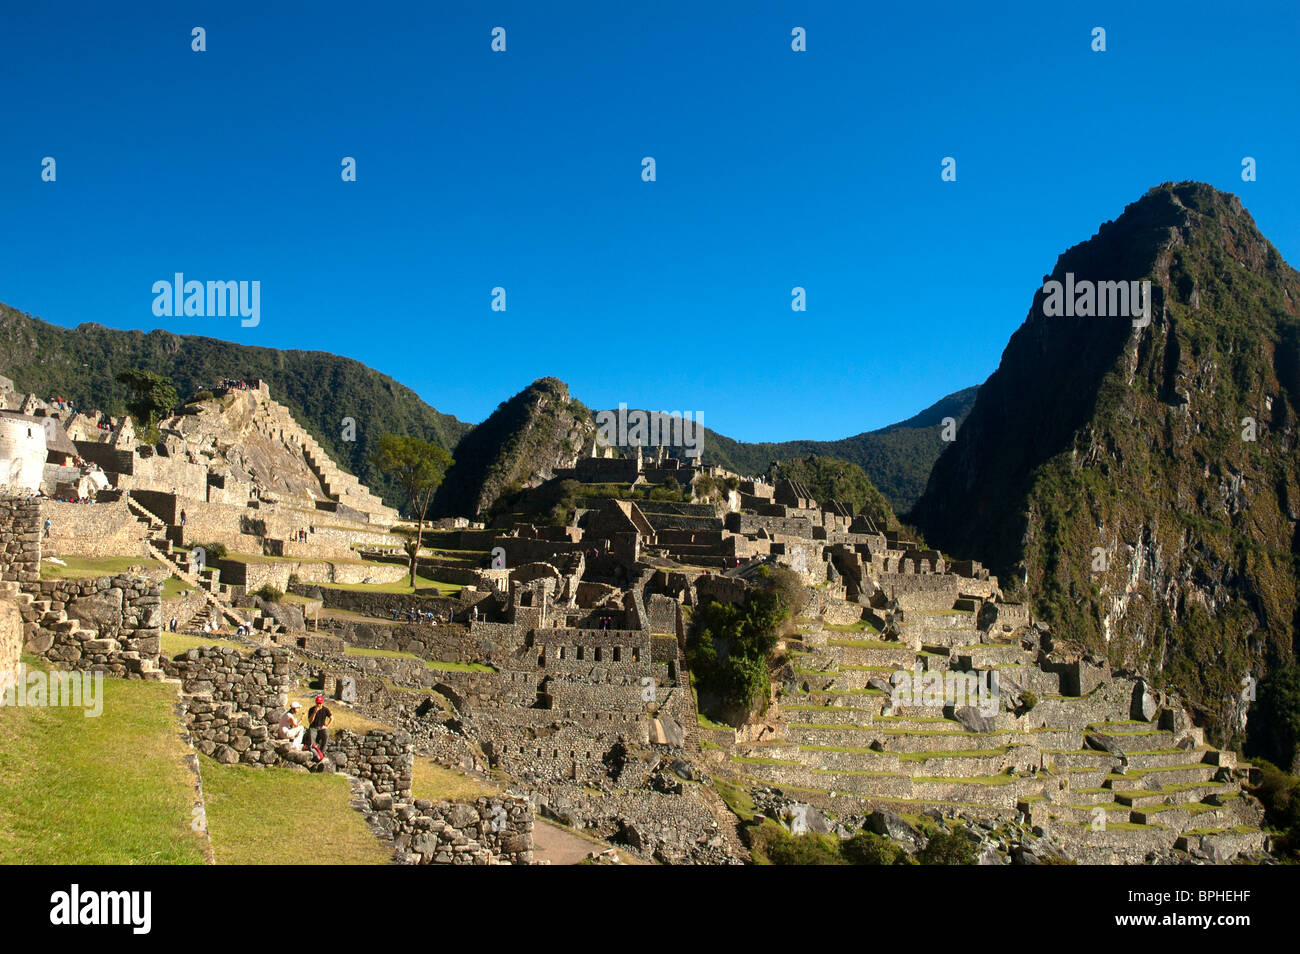 Intricate stonework of ruined buildings and garden terraces at the ancient Incan city of Machu Picchu, Peru. Stock Photo